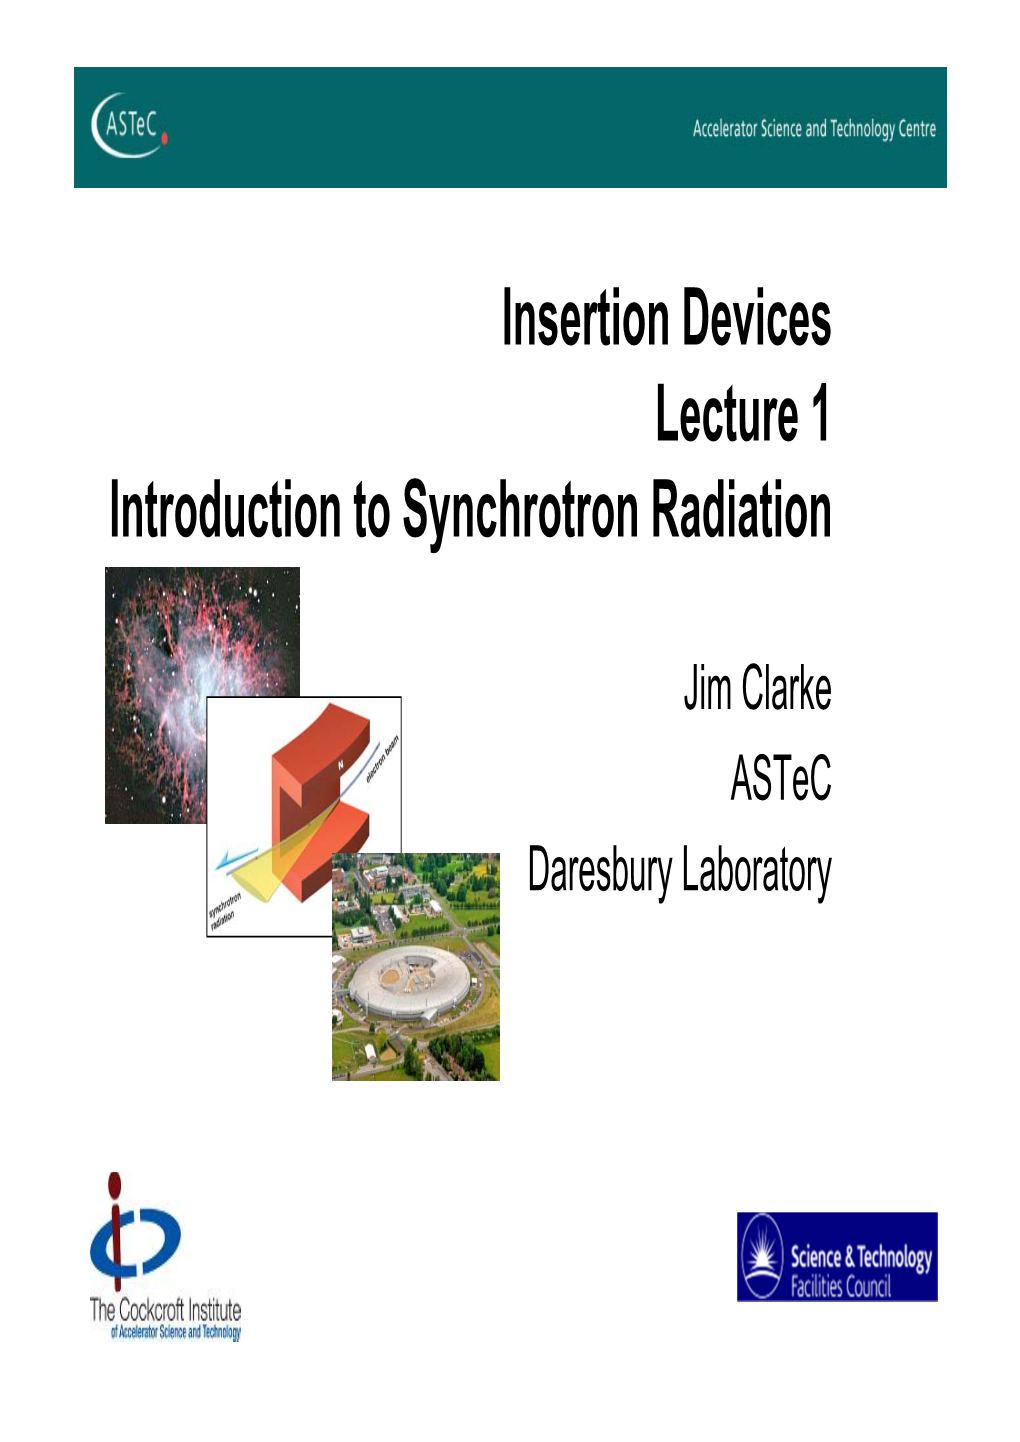 Insertion Devices Lecture 1 Introduction to Synchrotron Radiation